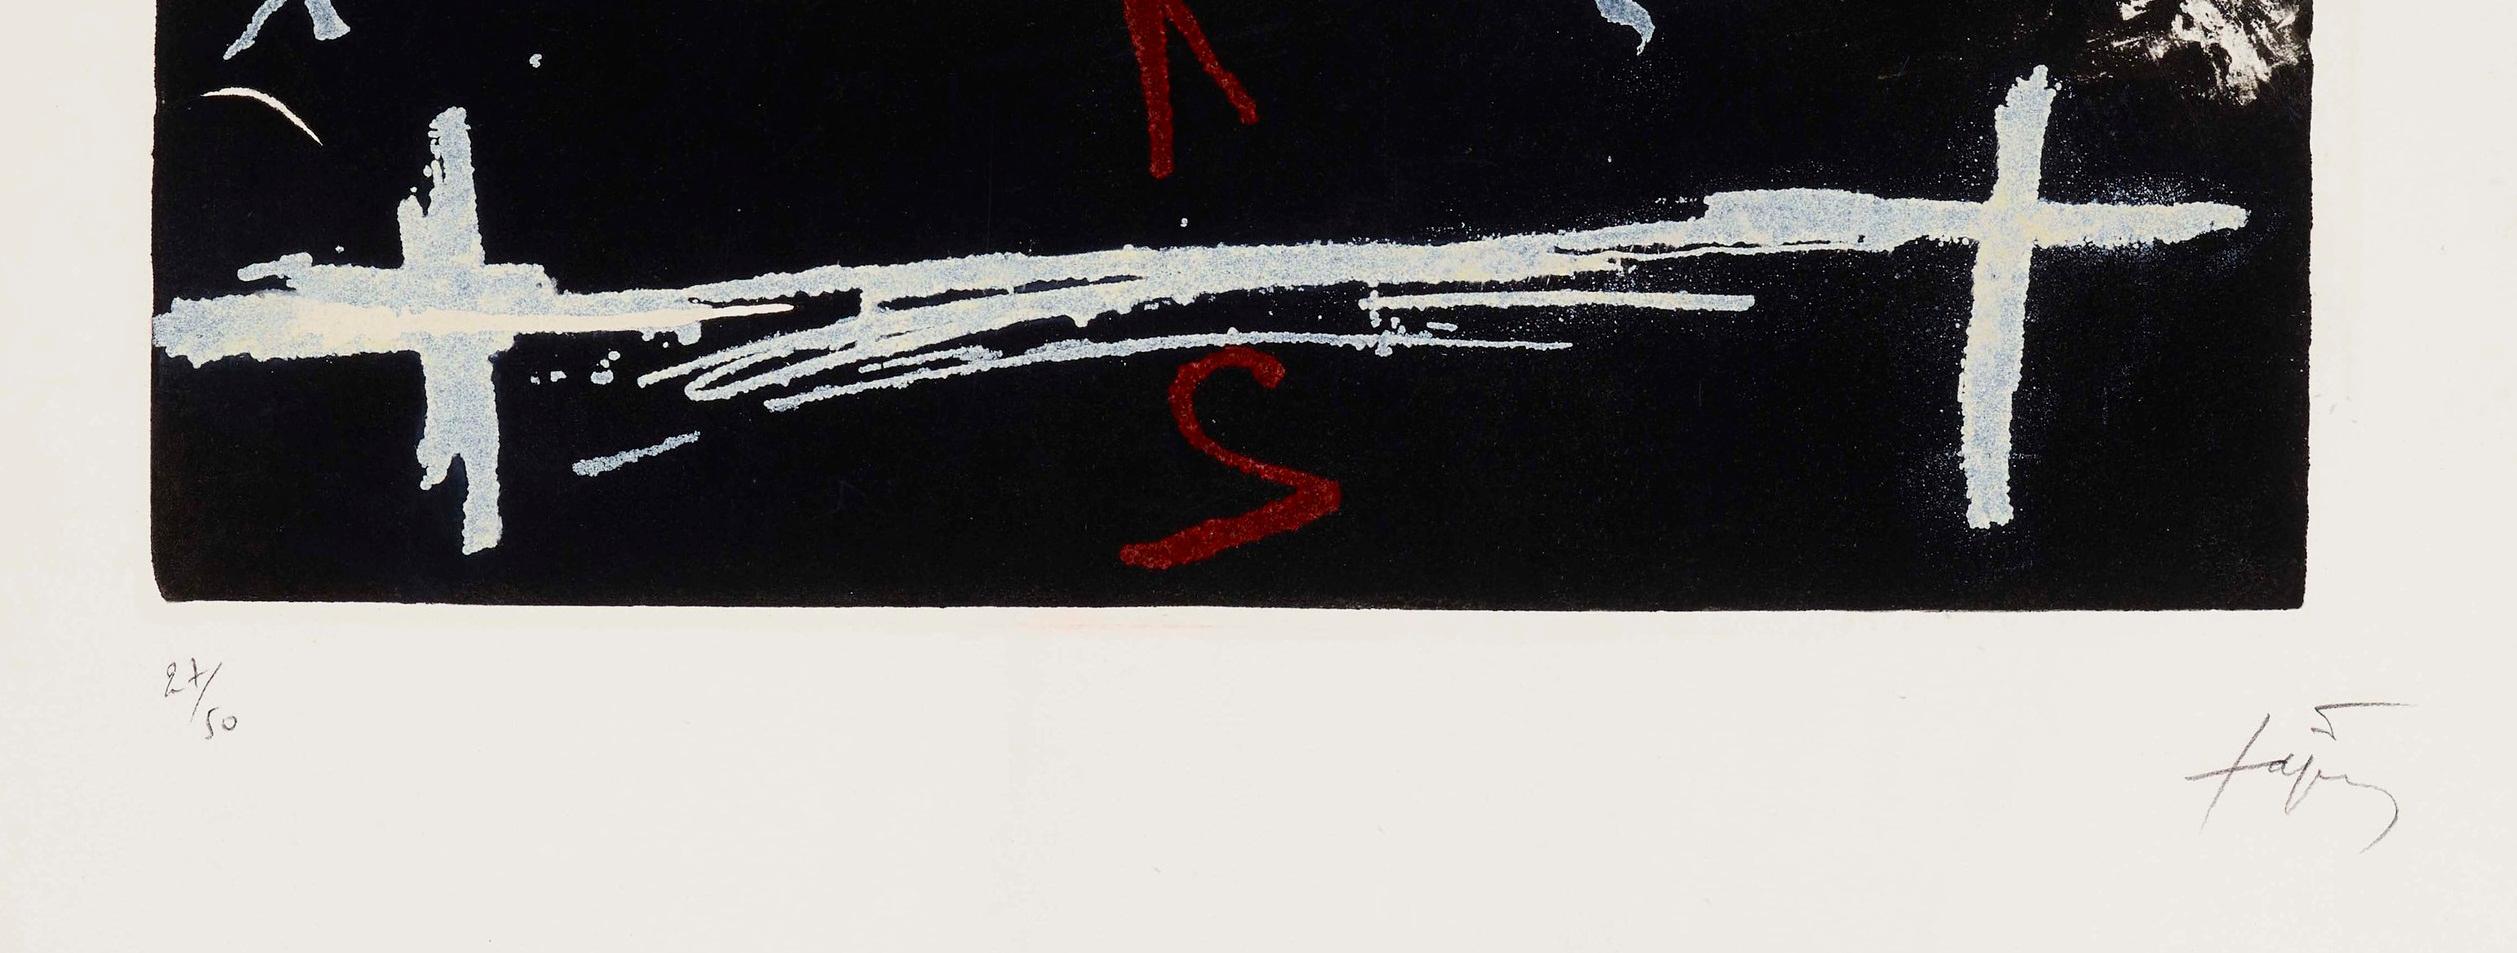 Double Croix Dark Tapies Cross Numbers Red Black White Abstract Contemporary - Print by Antoni Tàpies